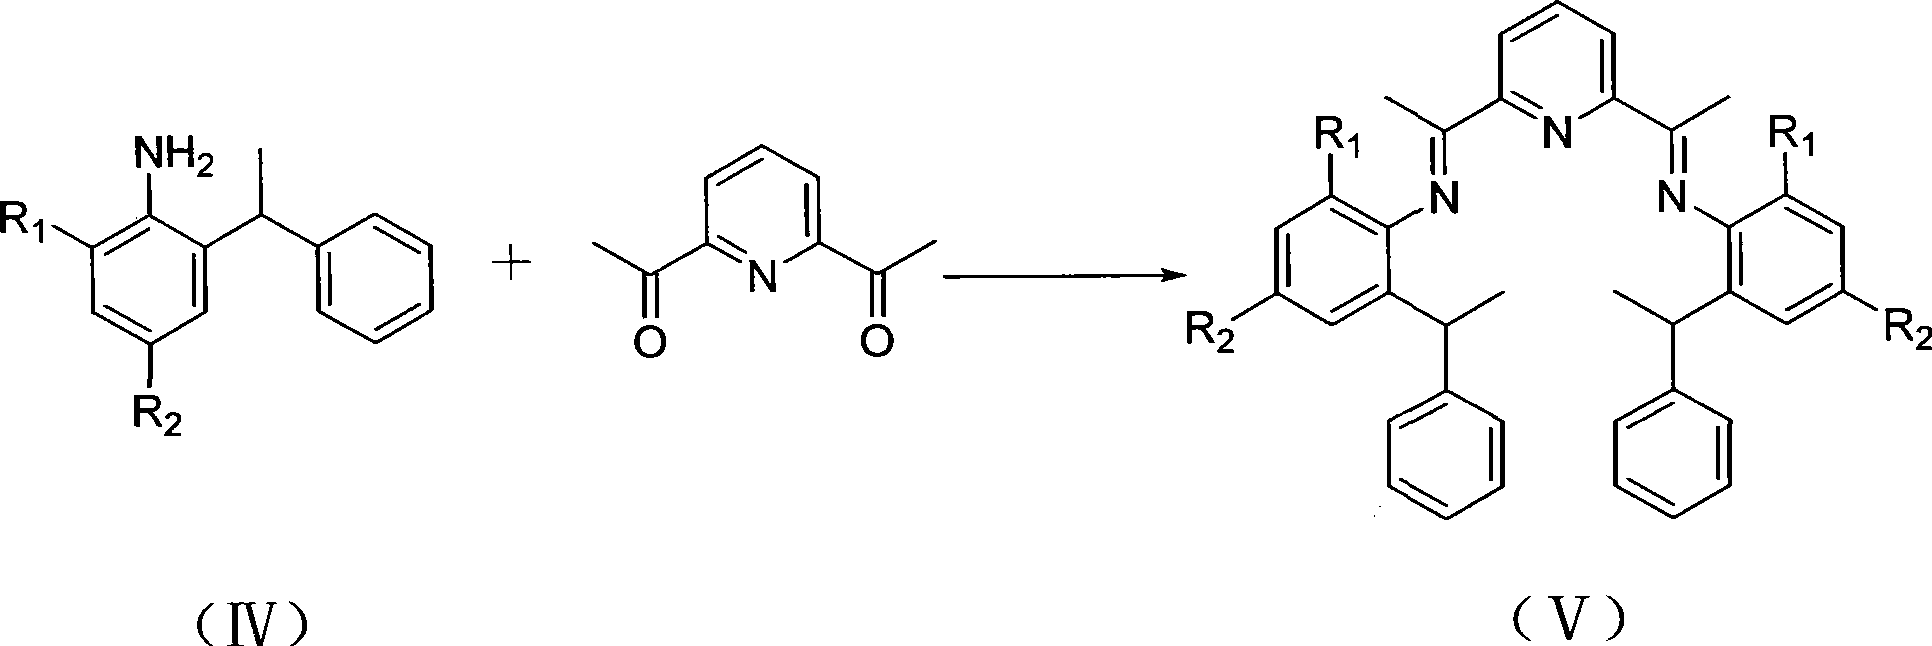 Pyridine diimine iron olefin polymerizing catalyst, as well as preparation method and application thereof